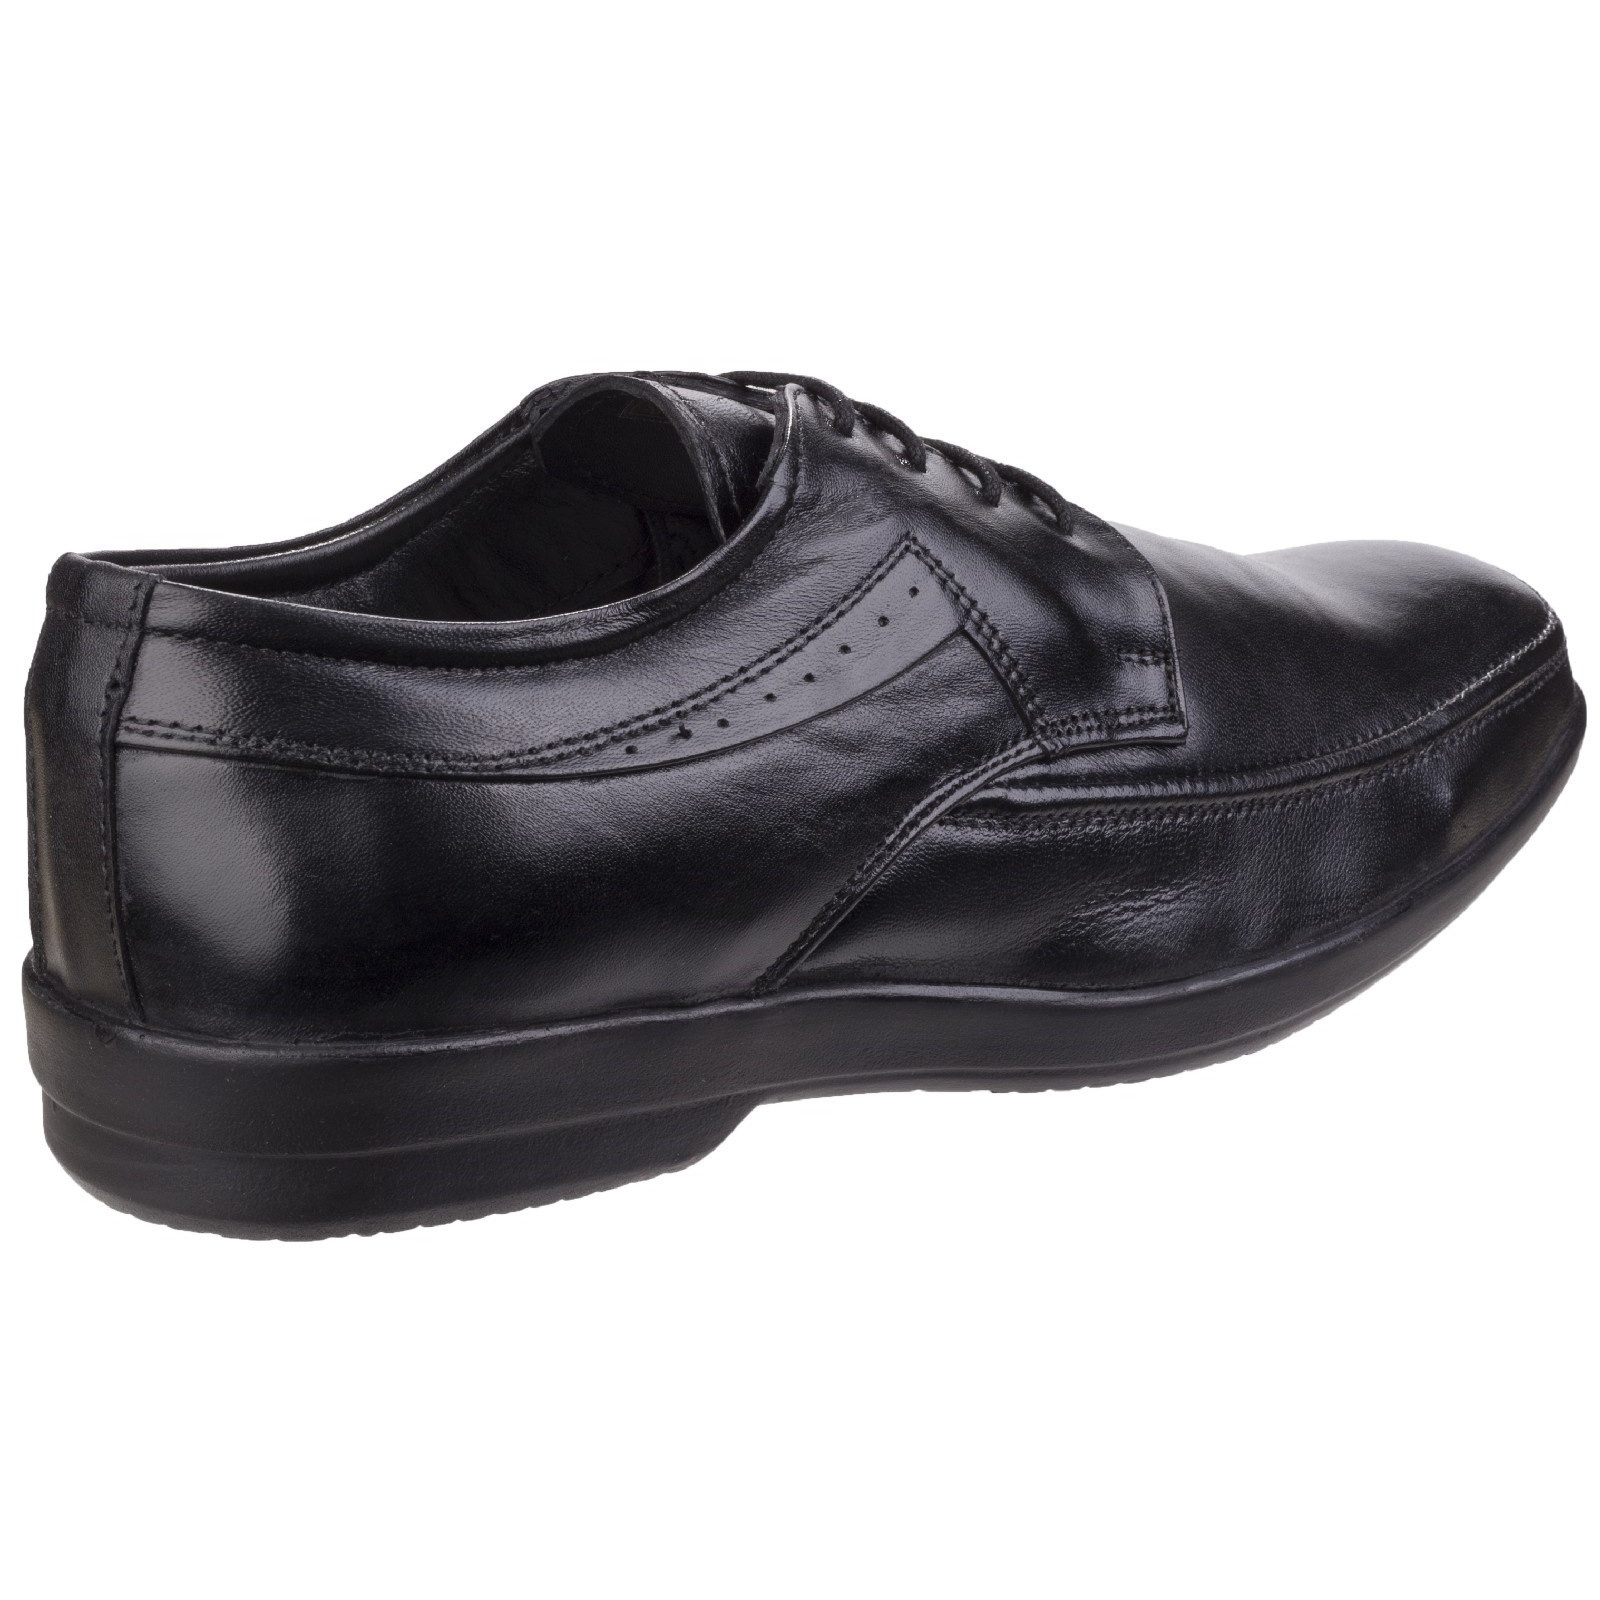 Fleet & Foster Mens Dave Apron Toe Oxford Formal Shoes - image 5 of 6